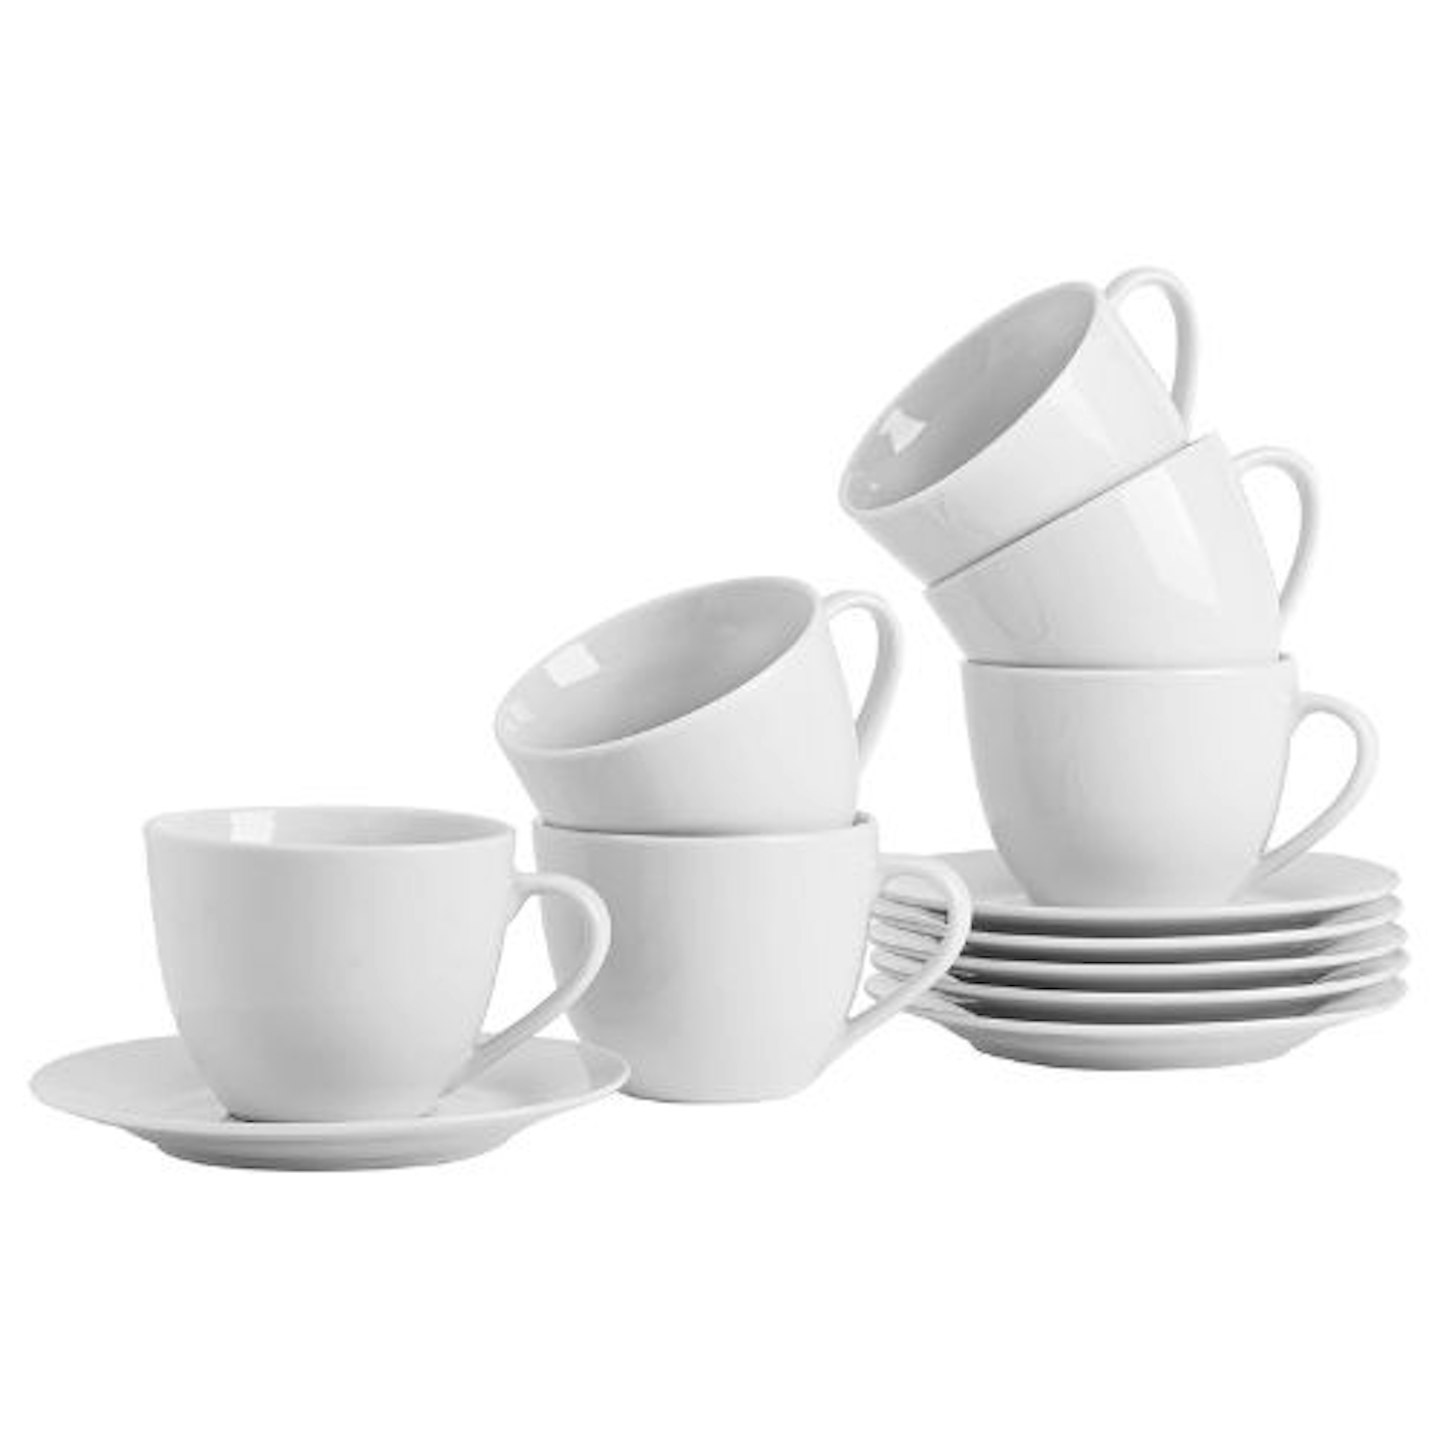 Argon Tableware 6x White Large Cappuccino Coffee Cup & Saucer Set - Cup 320ml (11oz) Saucer 14.5cm - Tea Coffee Latte Saucers Kitchen Set - Dishwasher and Microwave Safe